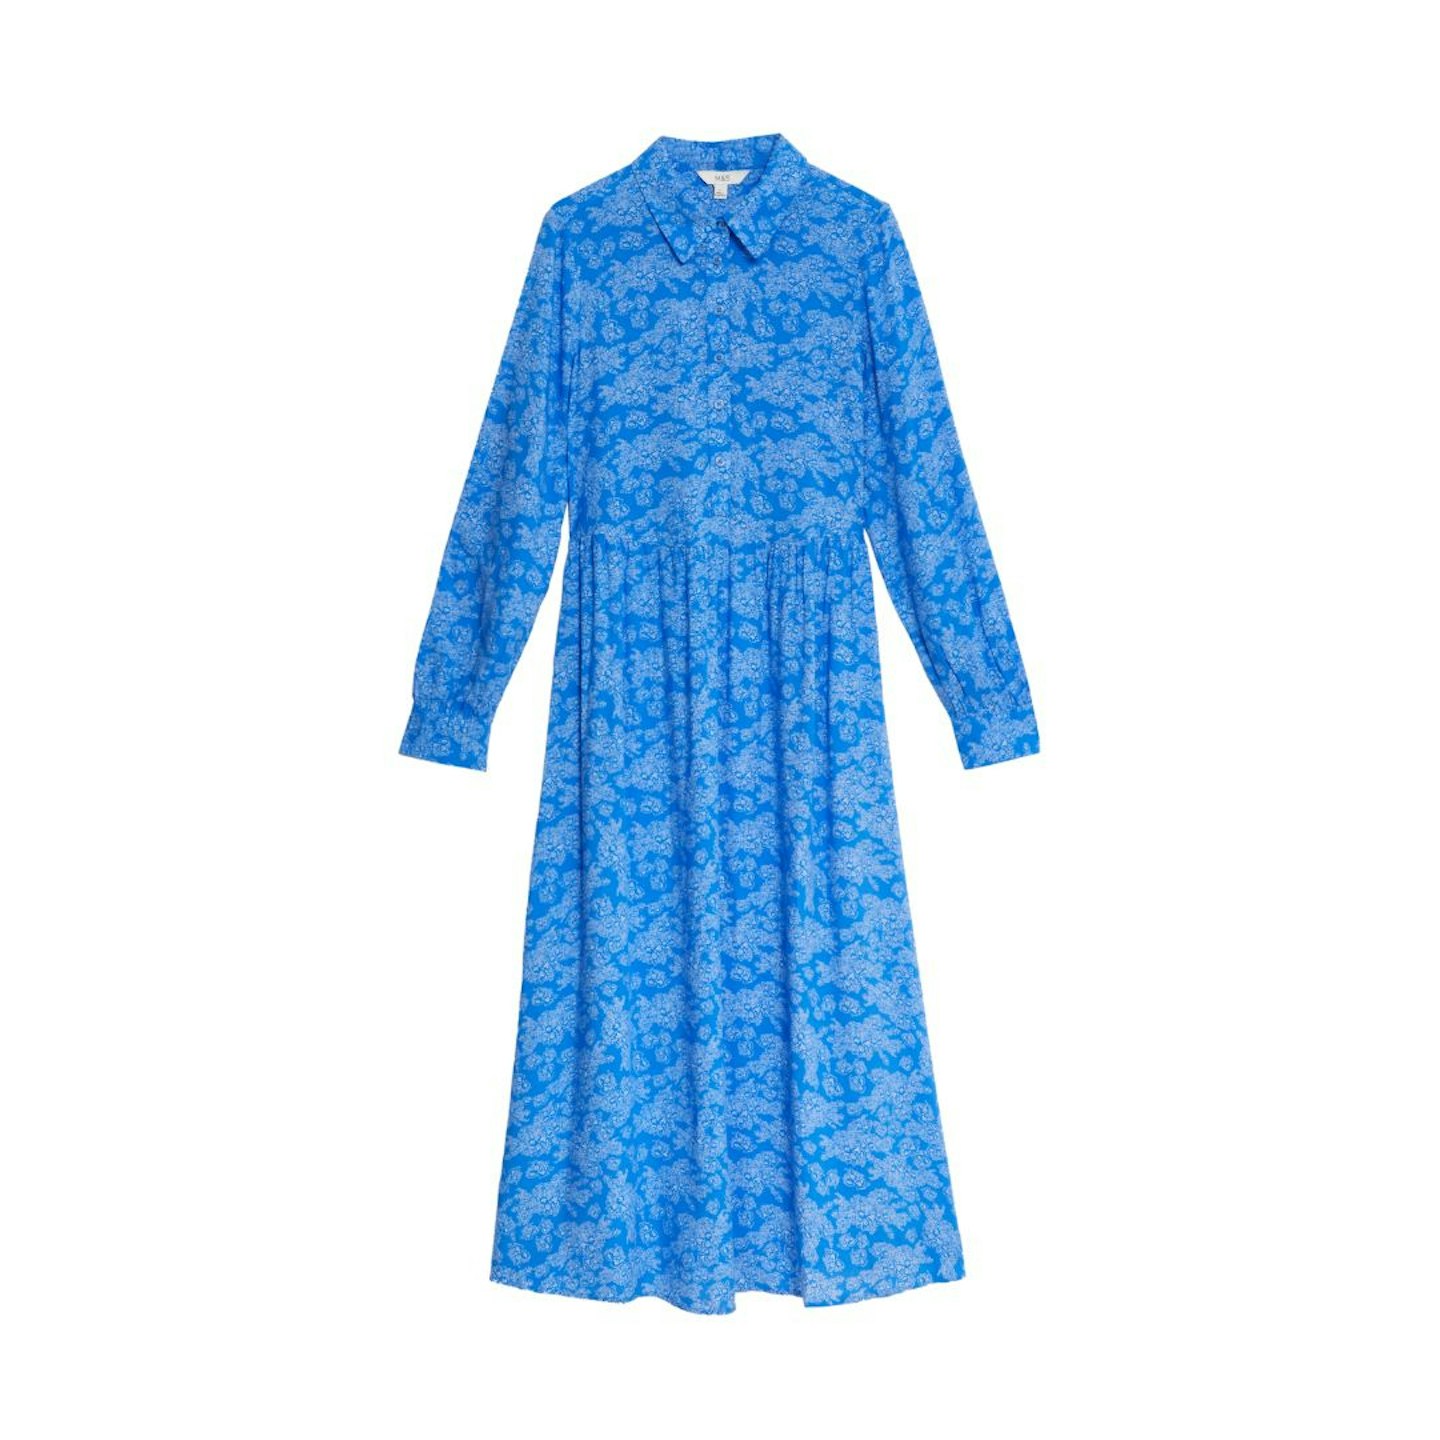 The best Marks and Spencer dresses: M&S Collection - Printed Button Front Midi Shirt Dress